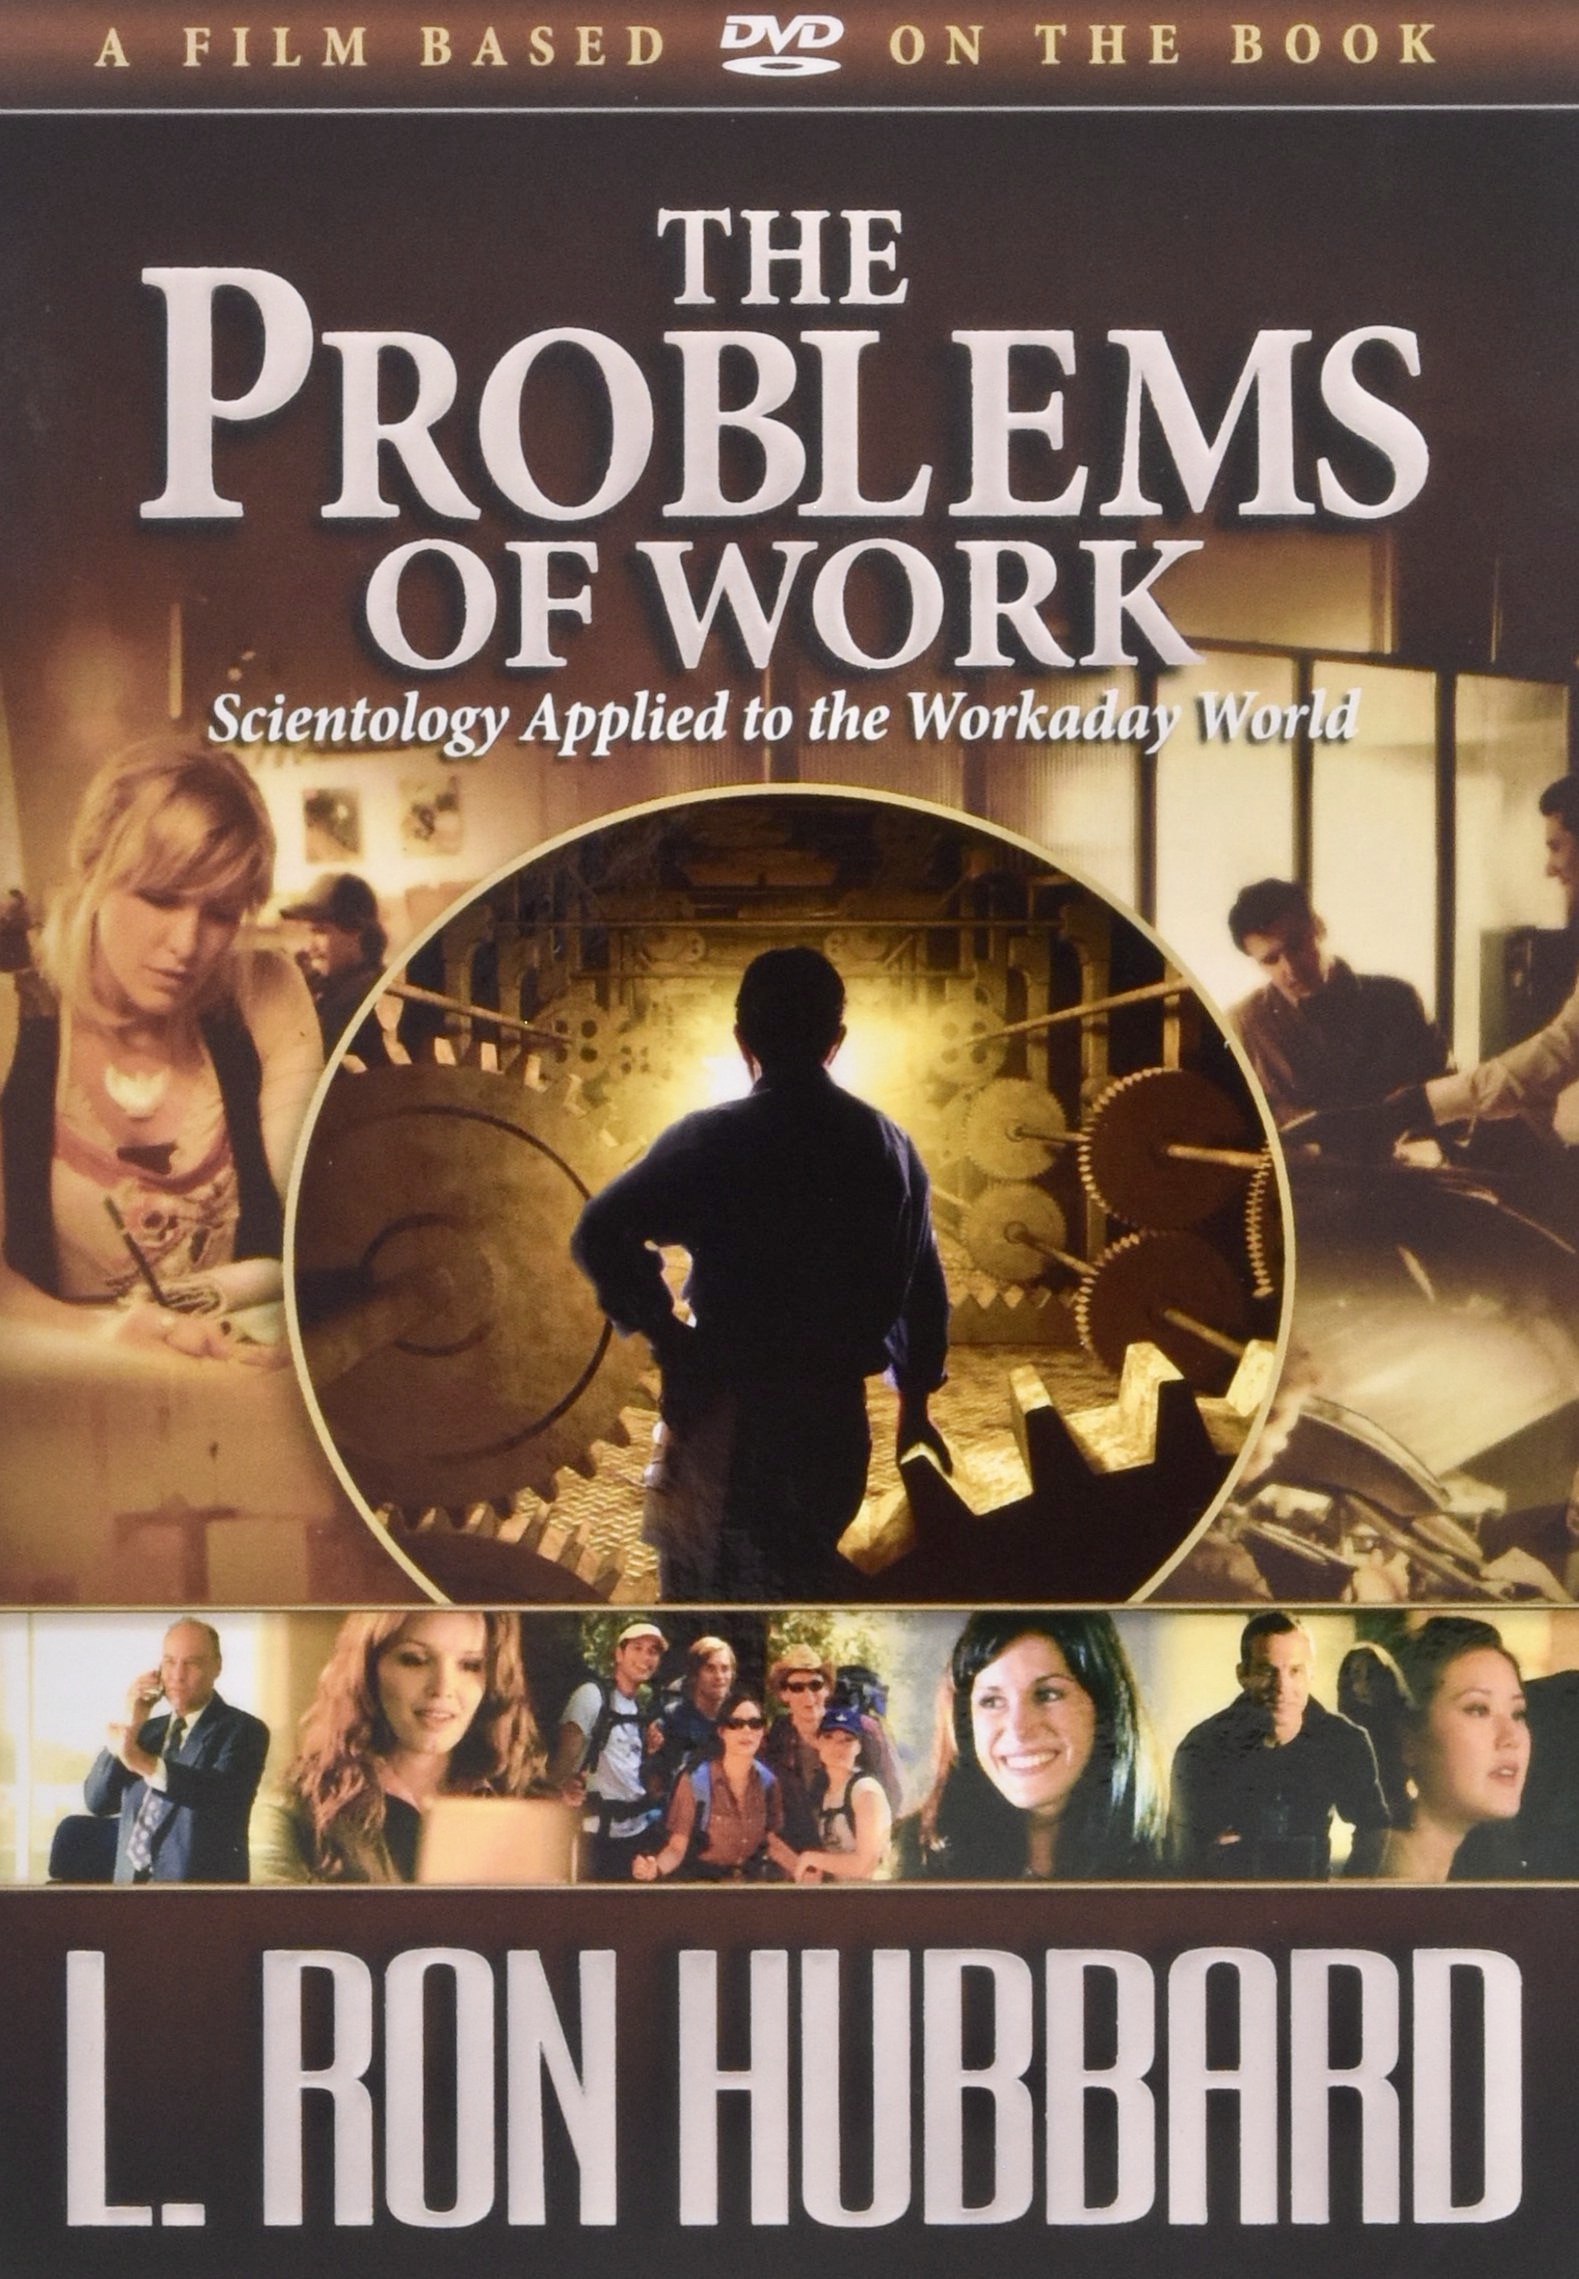 The Problems of Work (2010) Screenshot 1